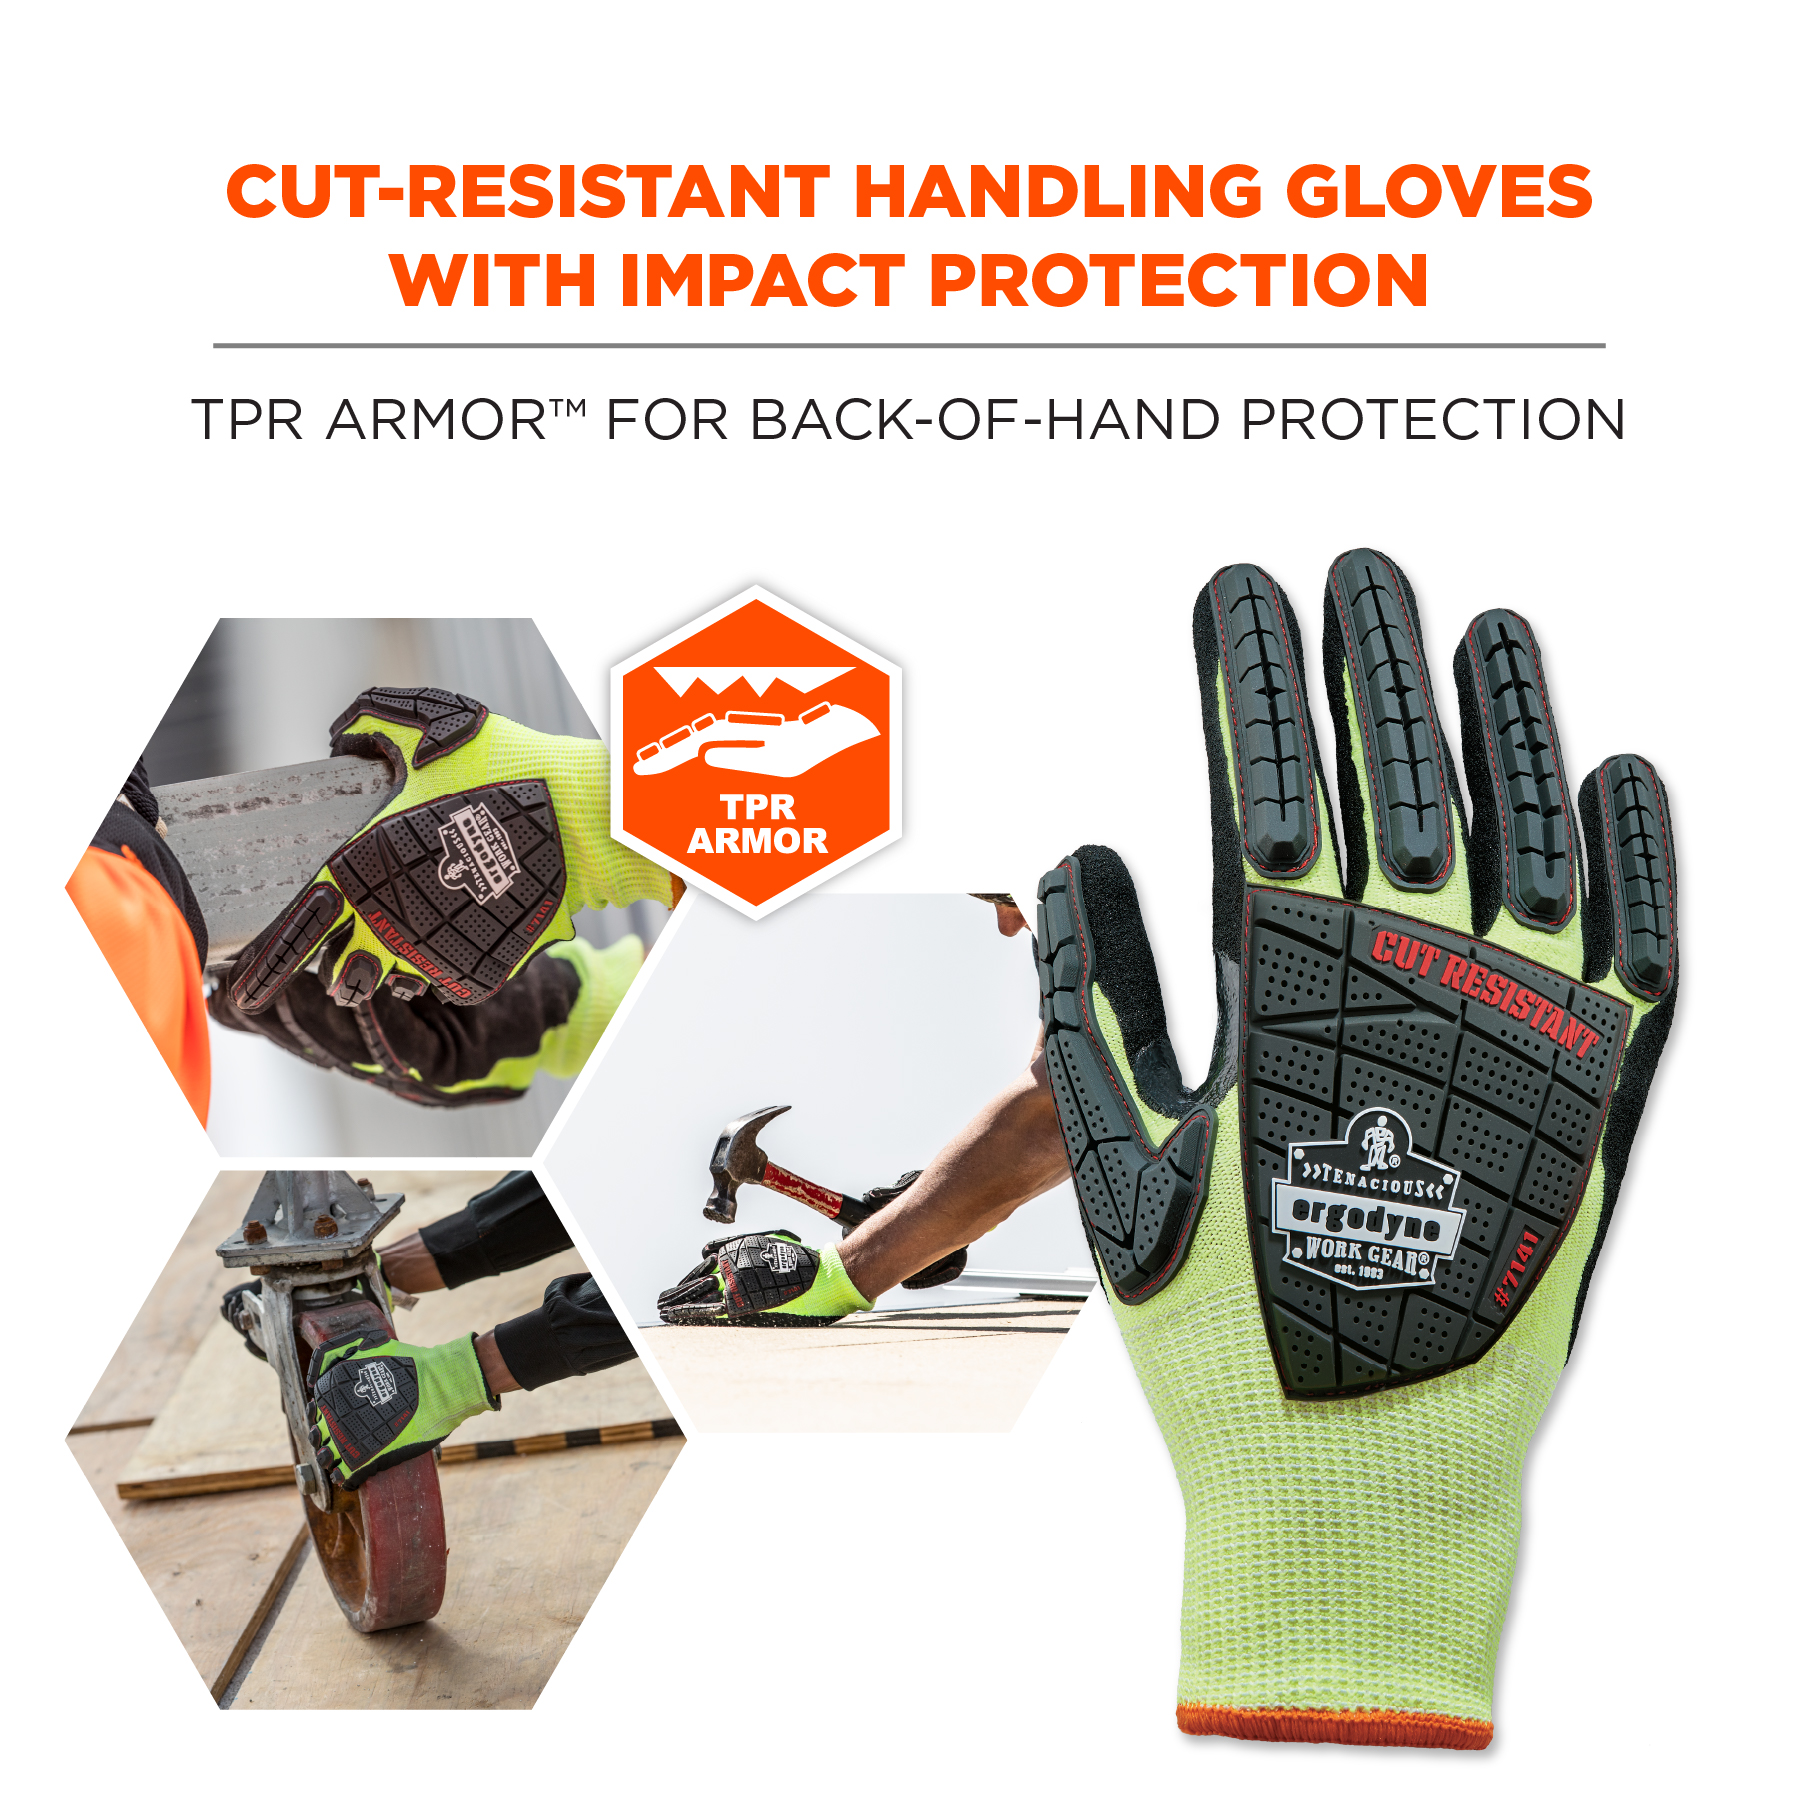 https://www.ergodyne.com/sites/default/files/product-images/17912-7141-cr-nitrile-dipped-dir-glove-cut-resistant-handling-gloves-with-impact-protection_0.jpg